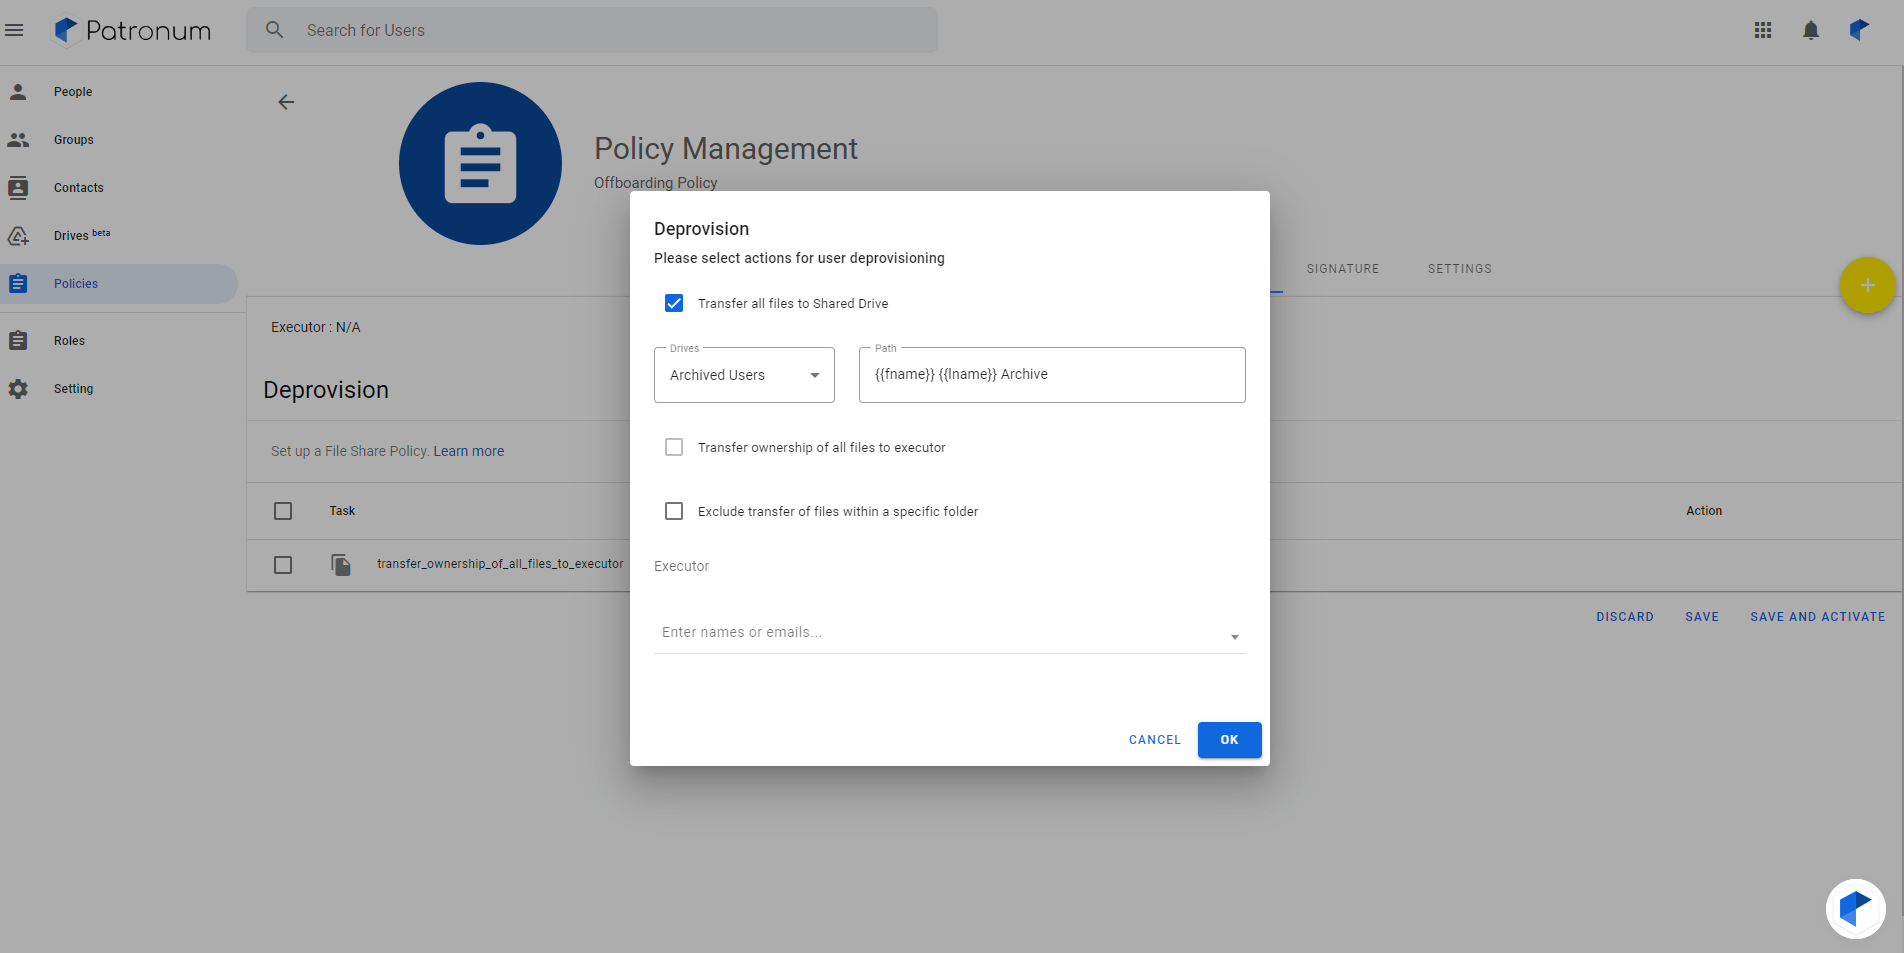 Archive or Delete Leavers Google Workspace Mailbox? featured image